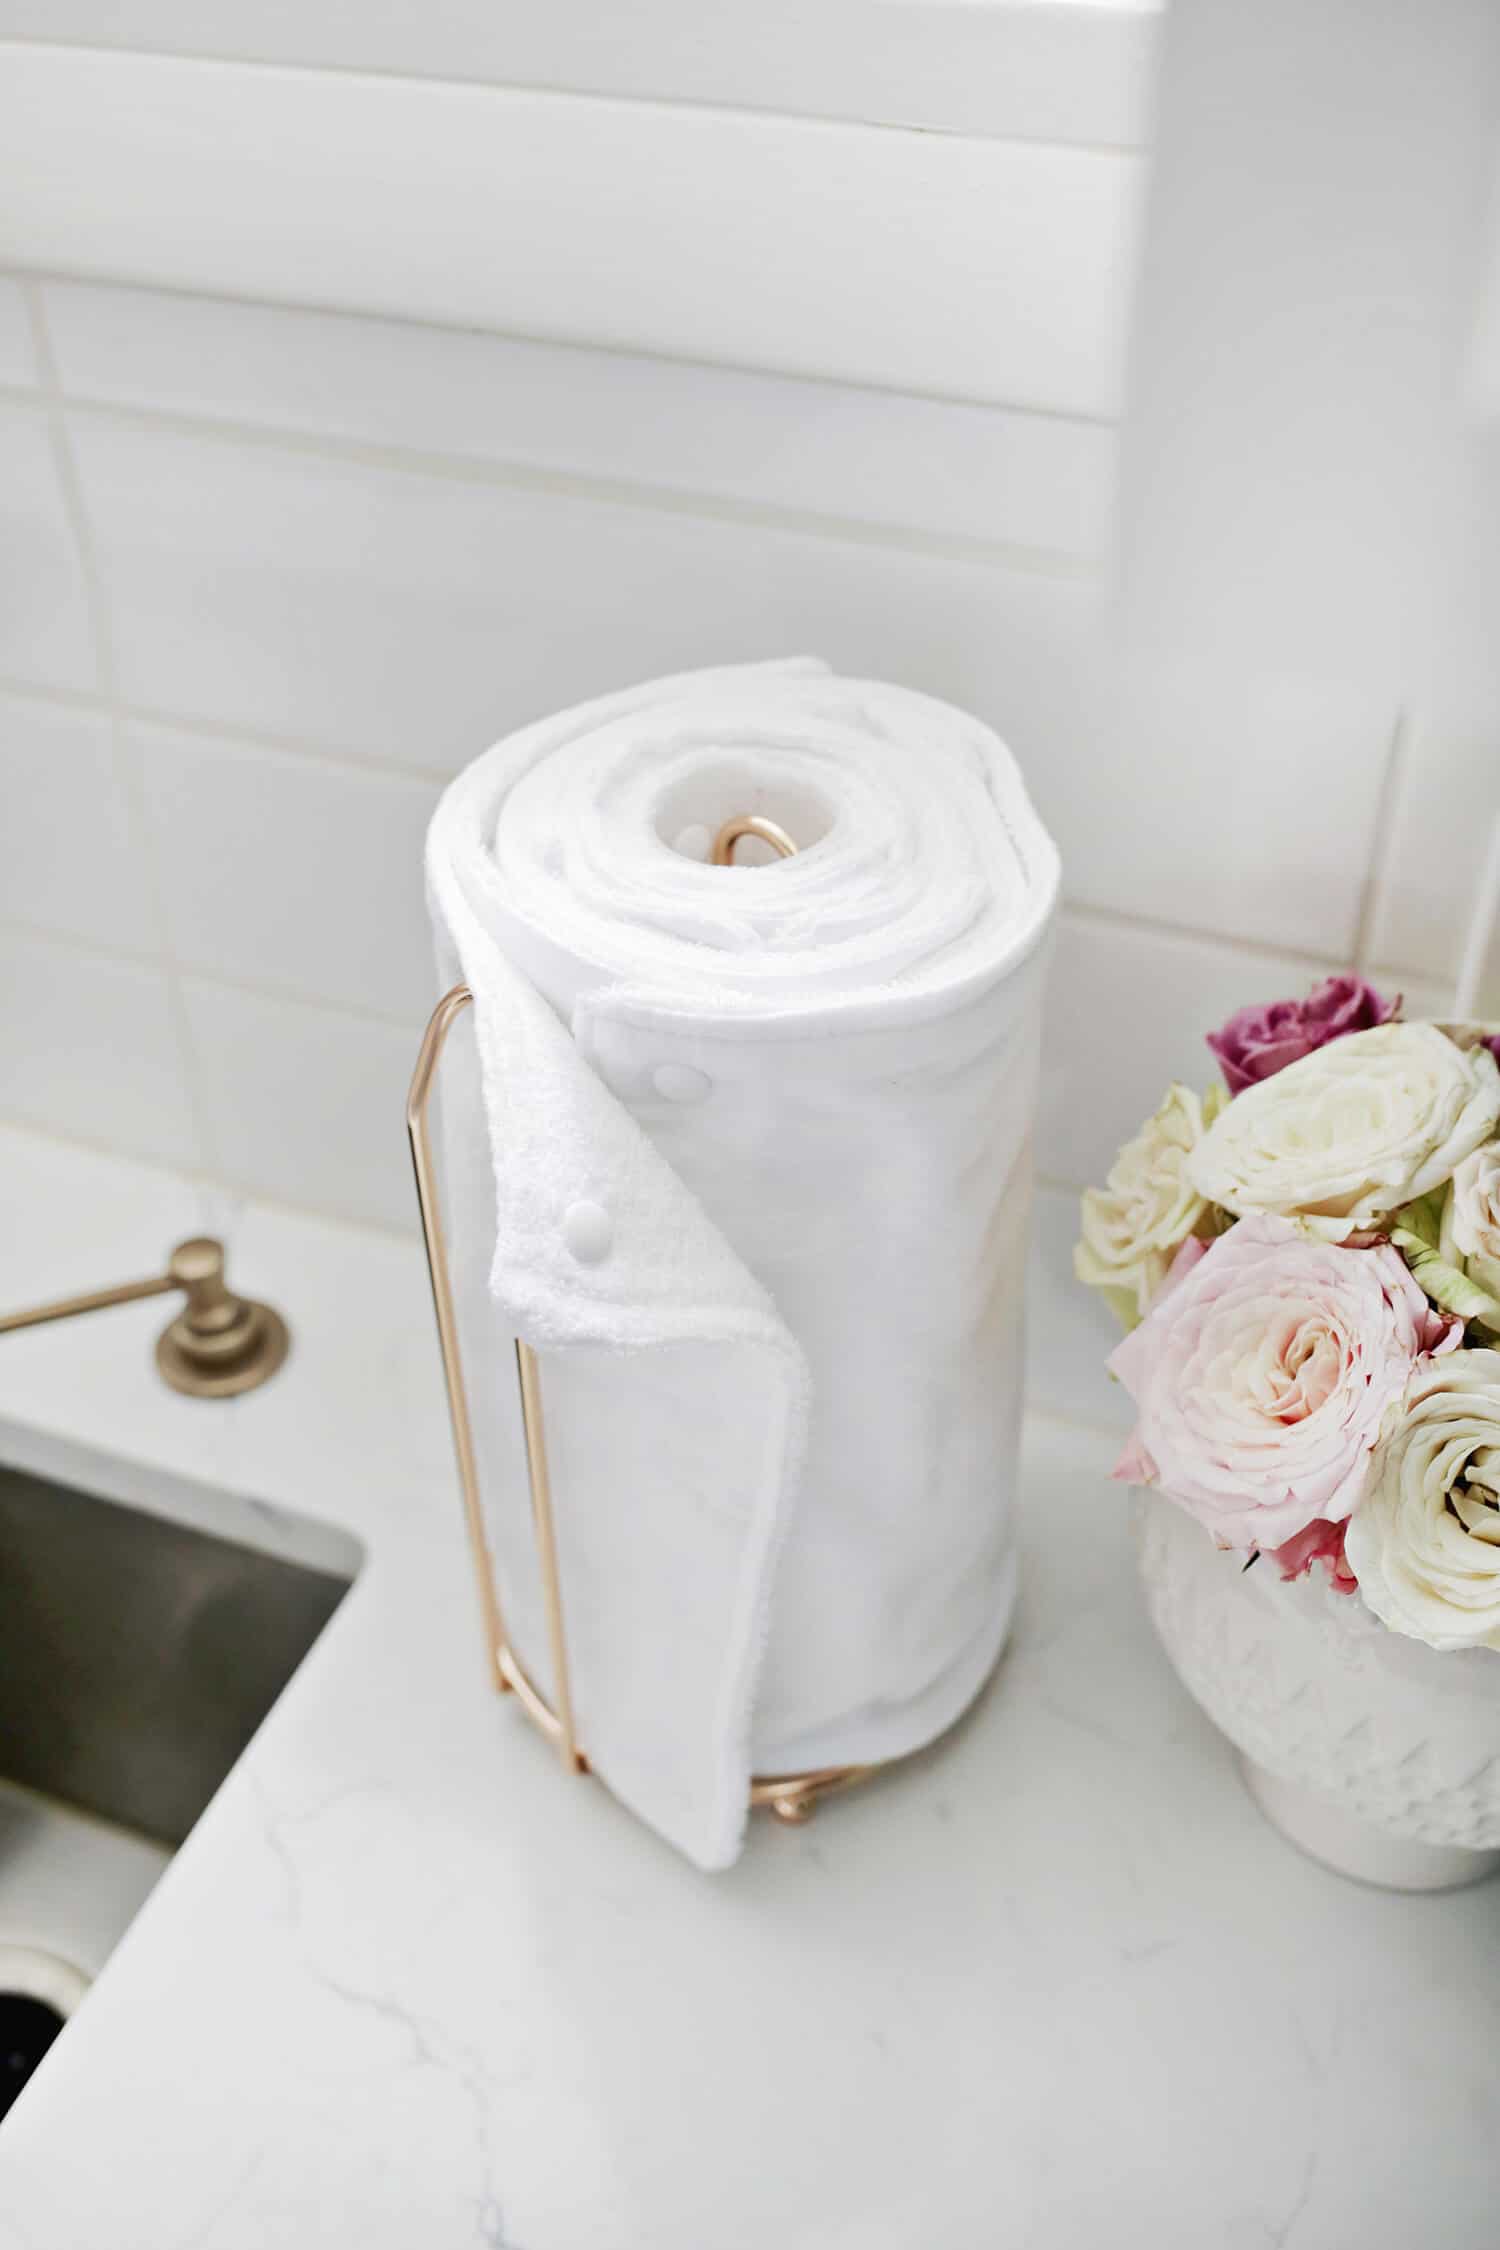 unpaper towel on a gold towel holder with a vase of flowers next to it